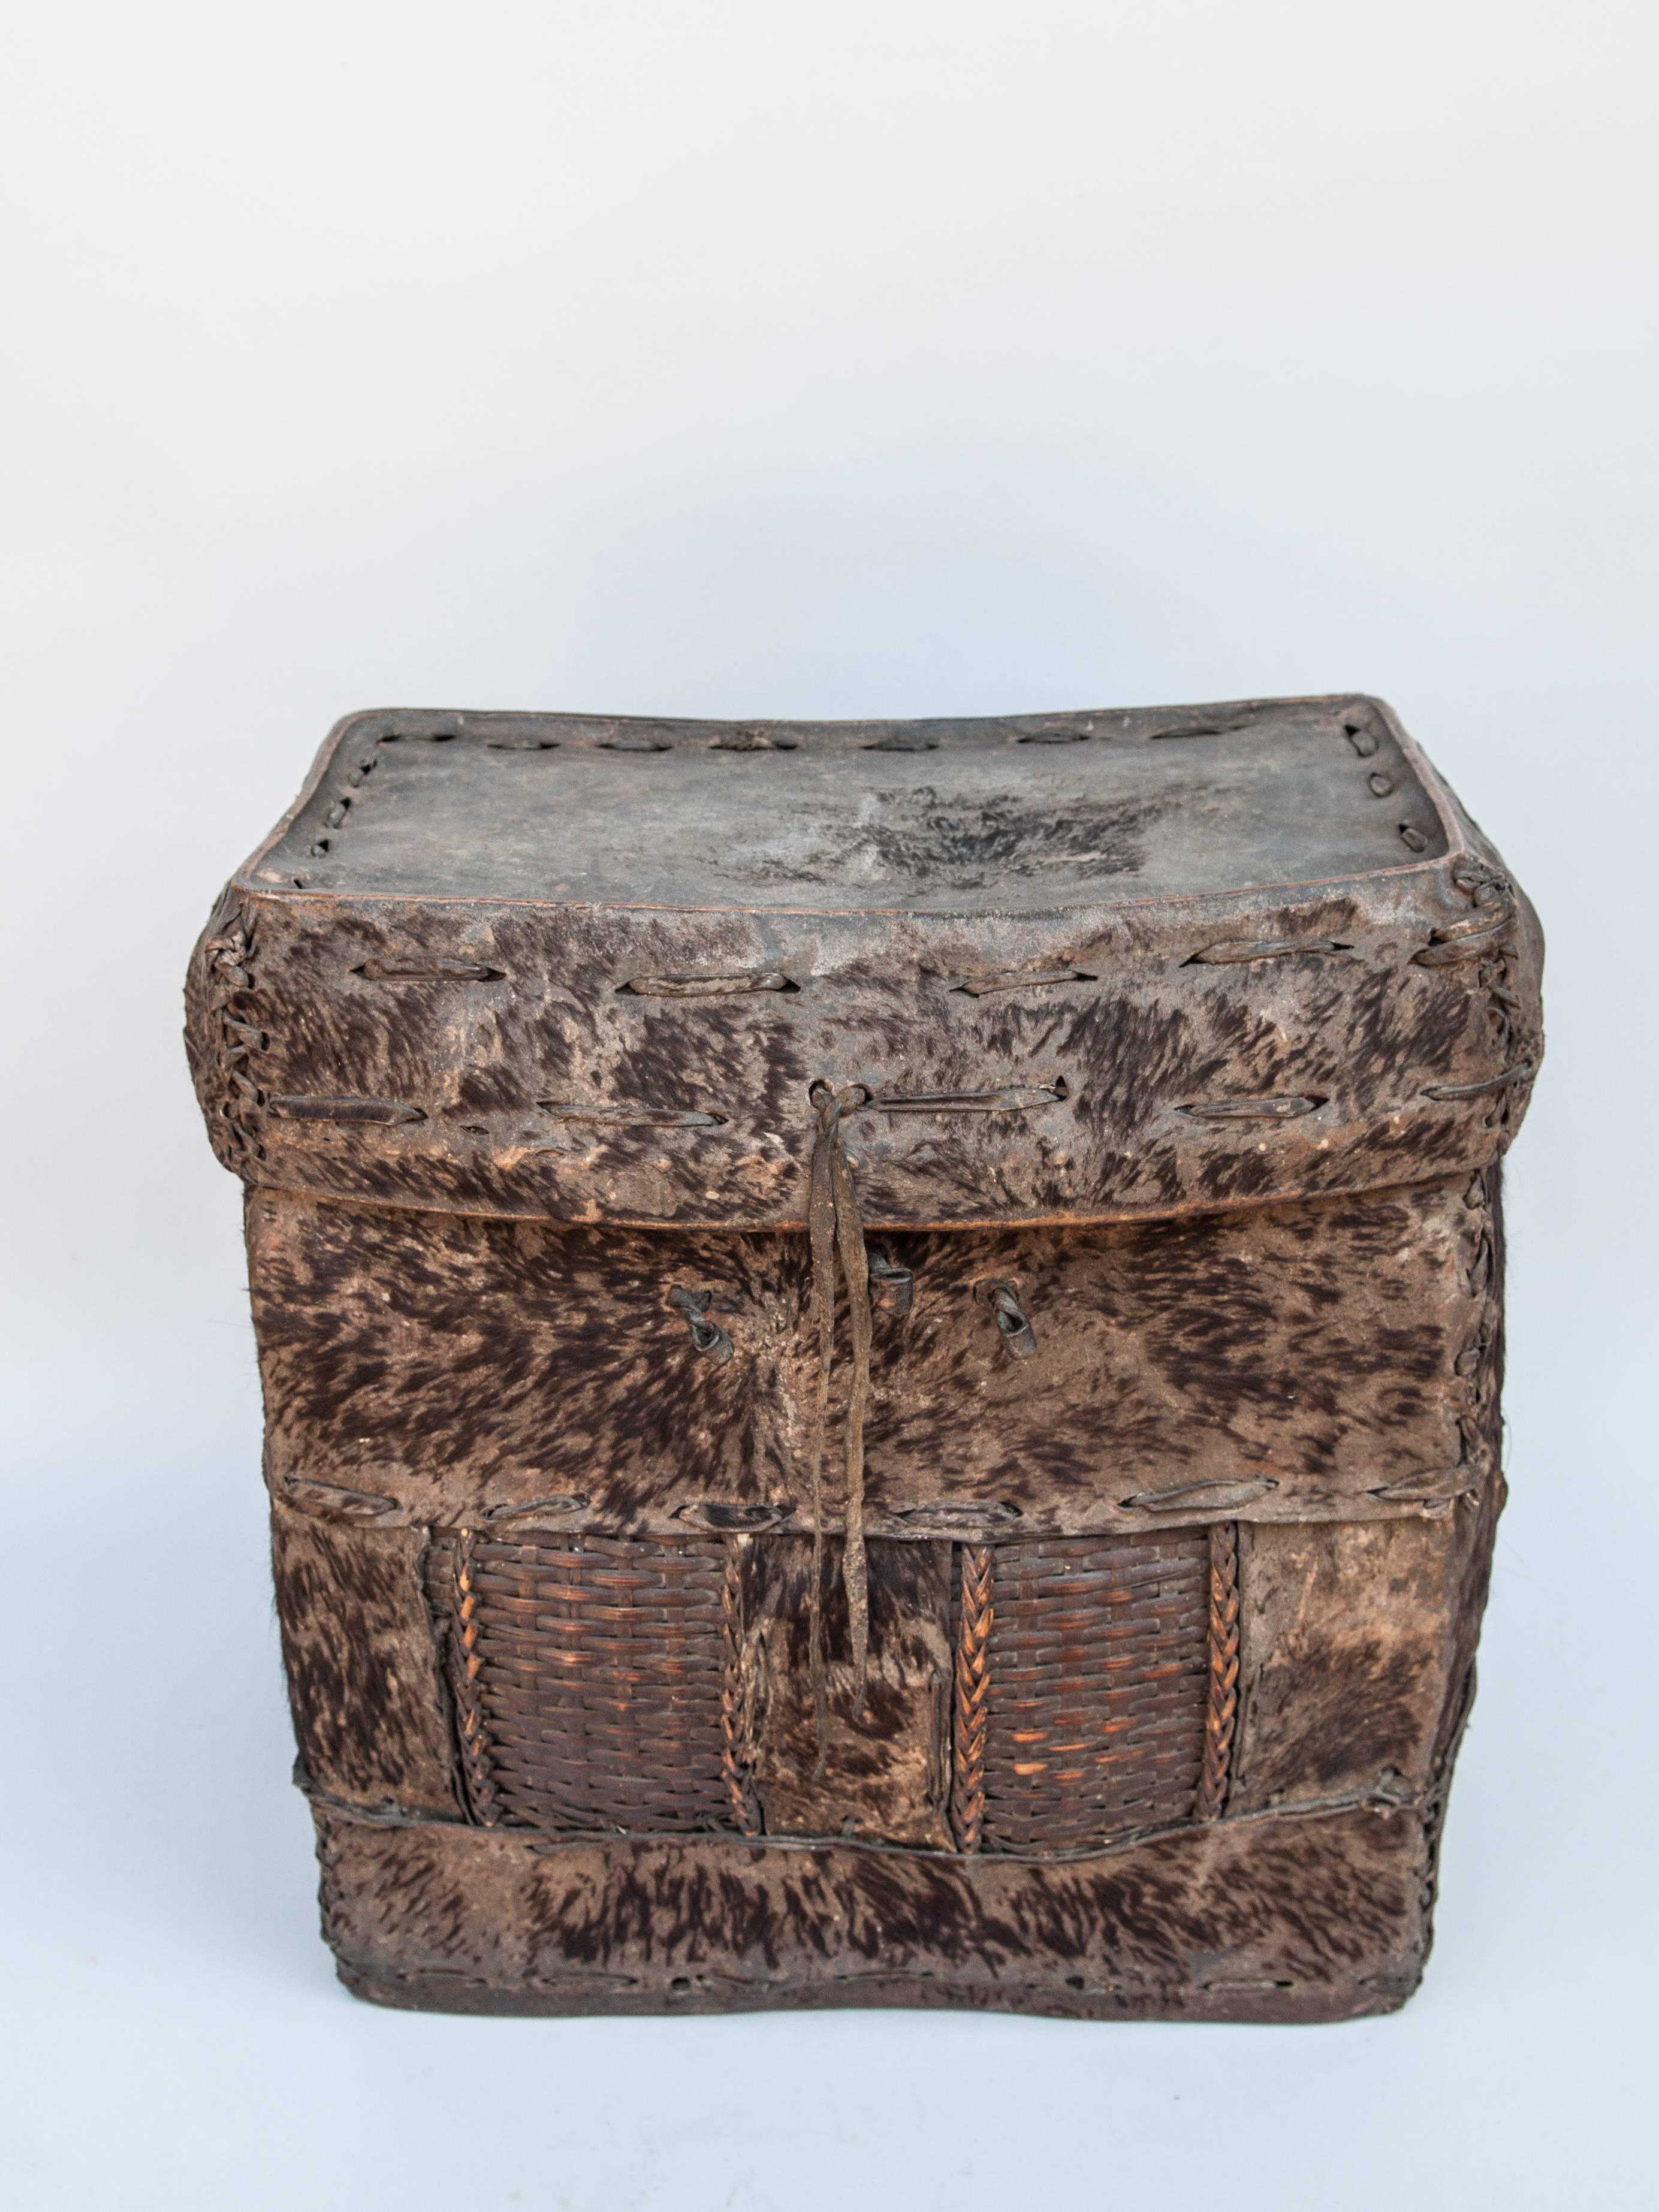 Tribal Storage Basket with Lid. Bhutan. Early to Mid-20th Century. Hide & Bamboo. 
A handwoven rugged bamboo frame covered with hide, comprises this extremely robust rustic storage basket from Bhutan. This basket would have been used to store and